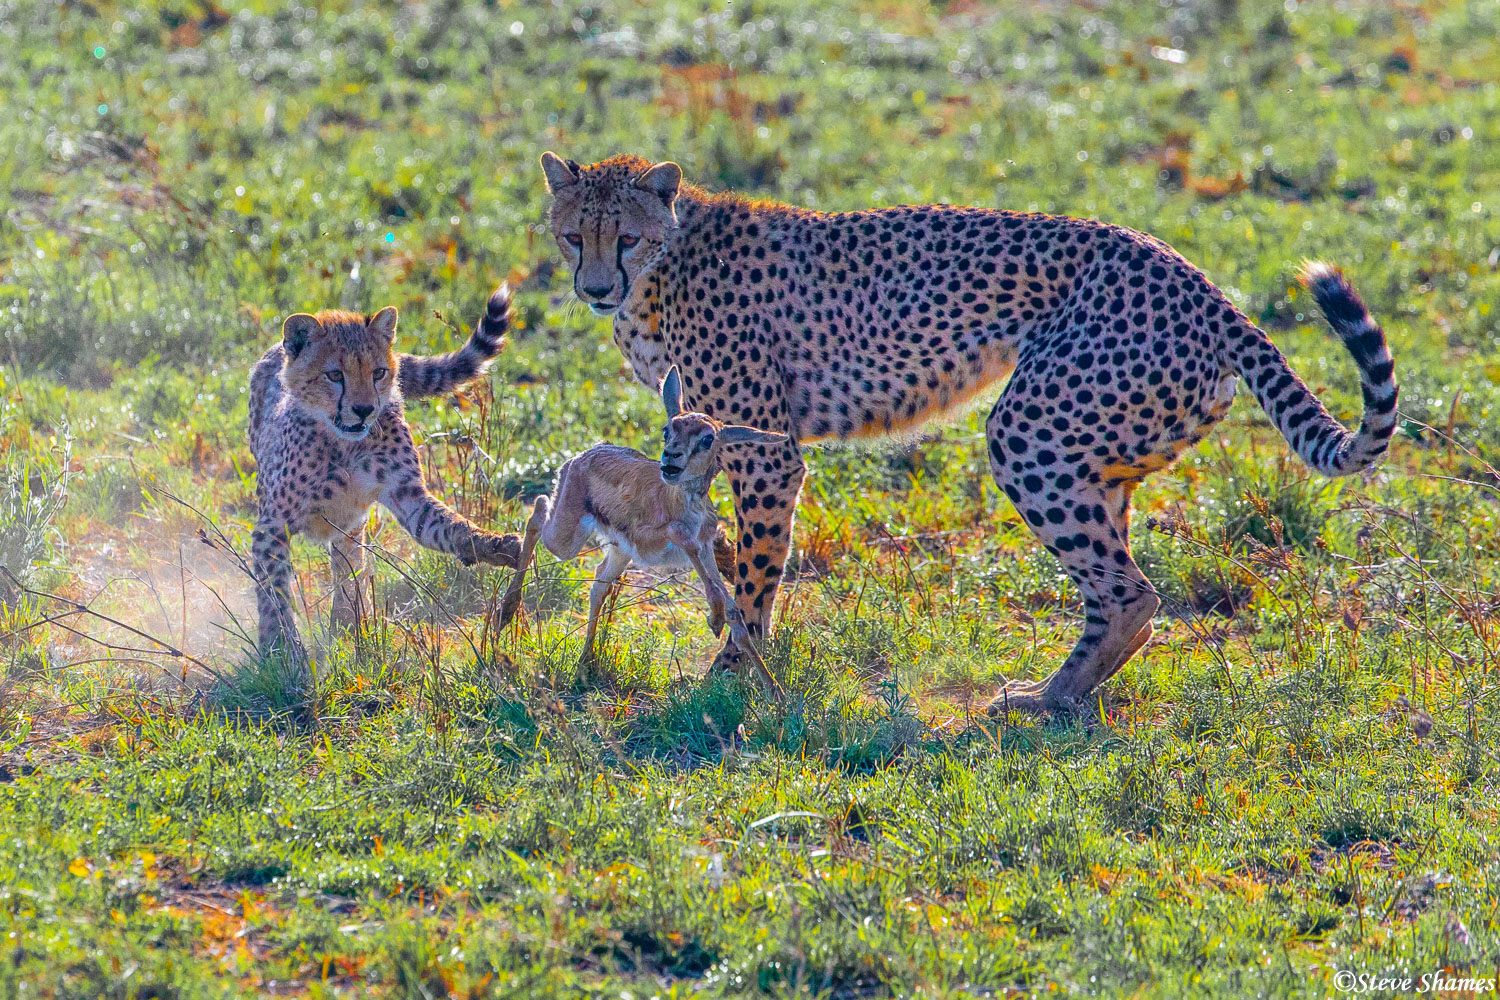 And here is why the mother kept the gazelle alive, so the cub can practice hunting skills!